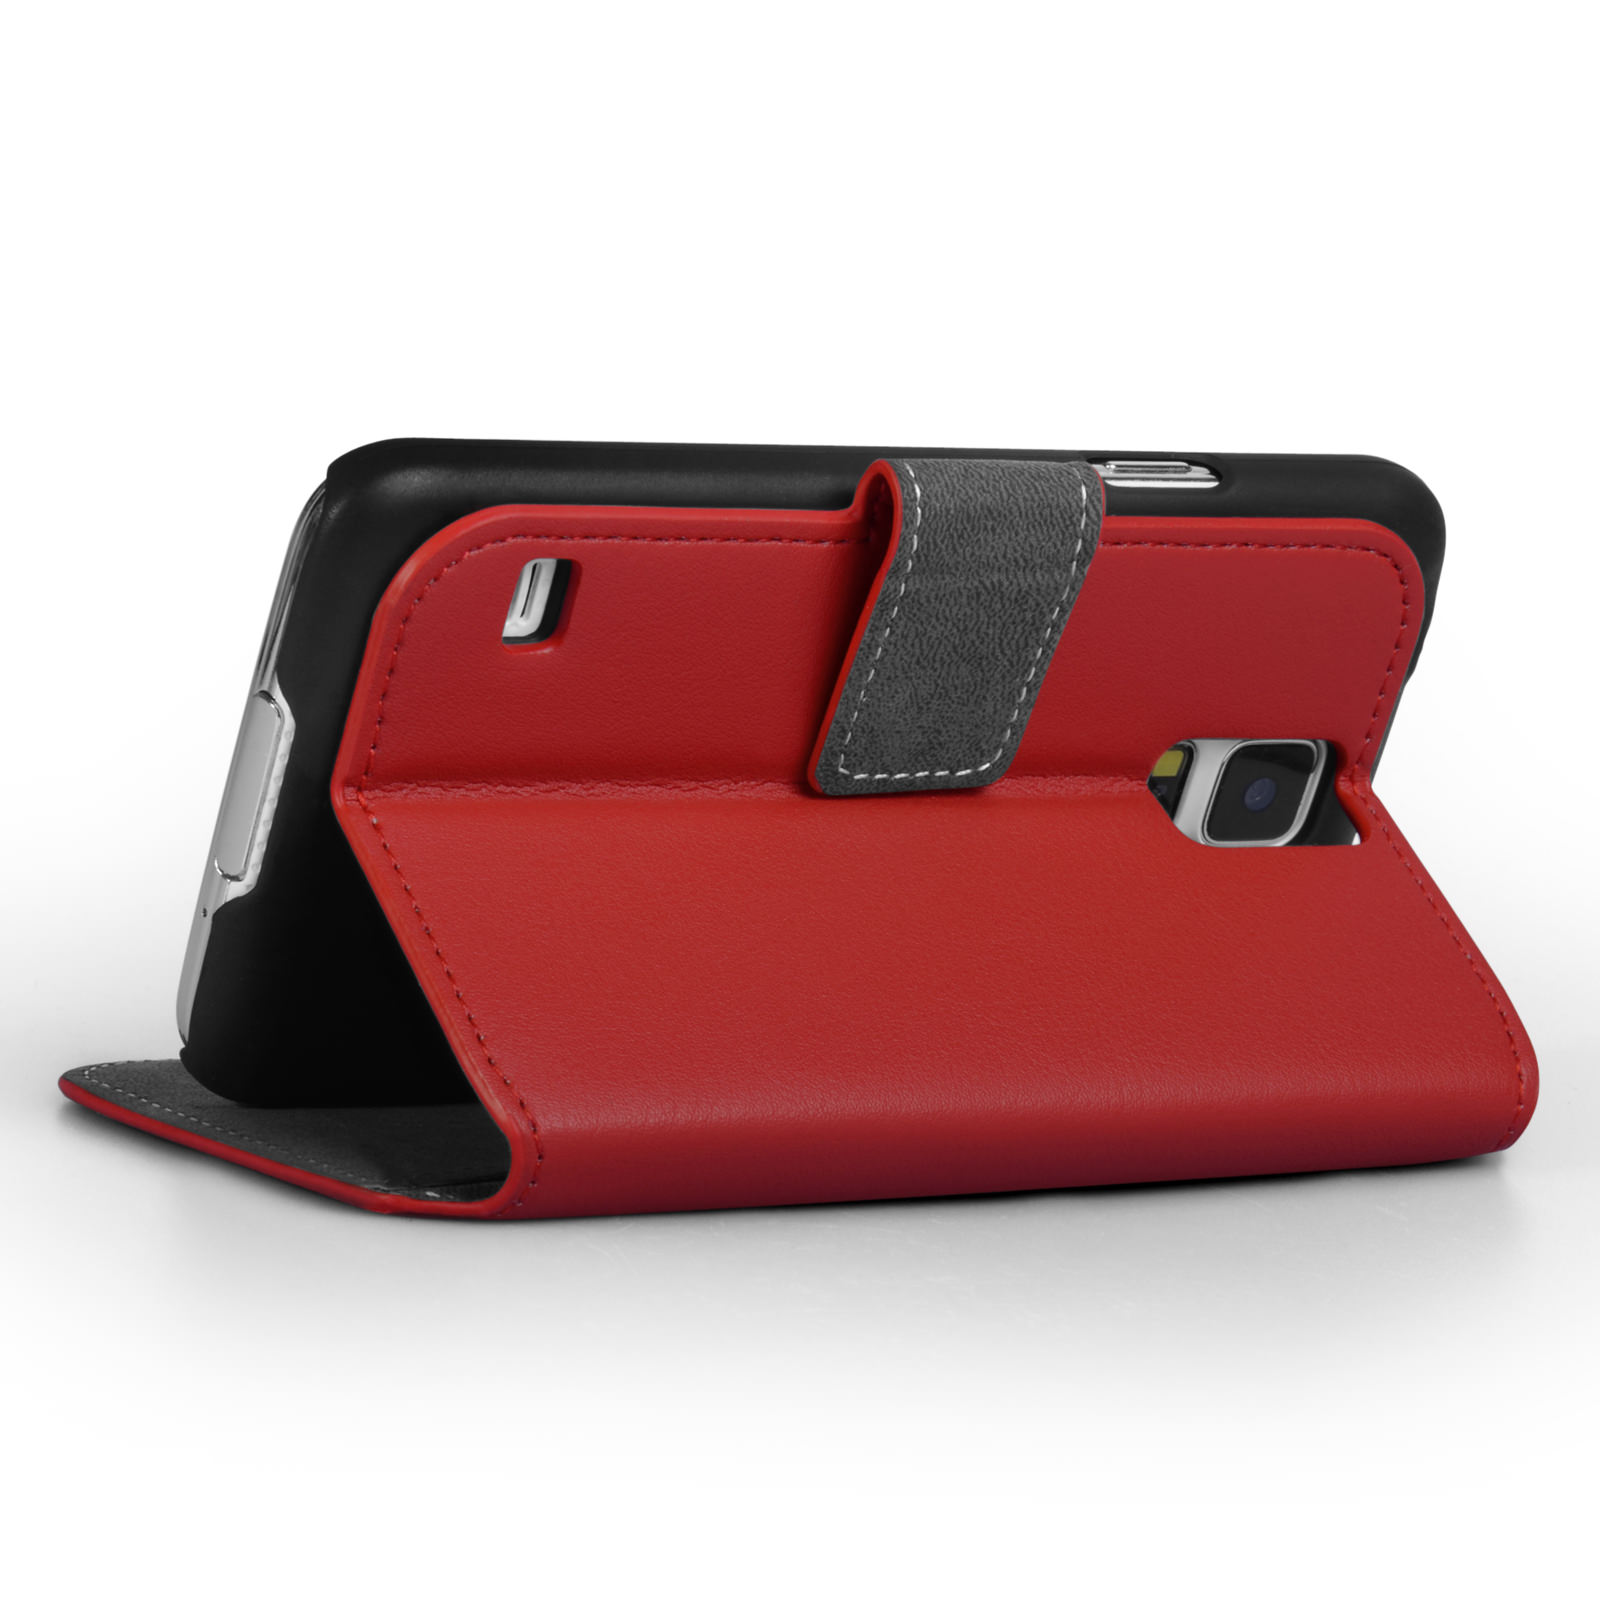 YouSave Accessories Samsung Galaxy S5 PU Wallet Stand Case – Red